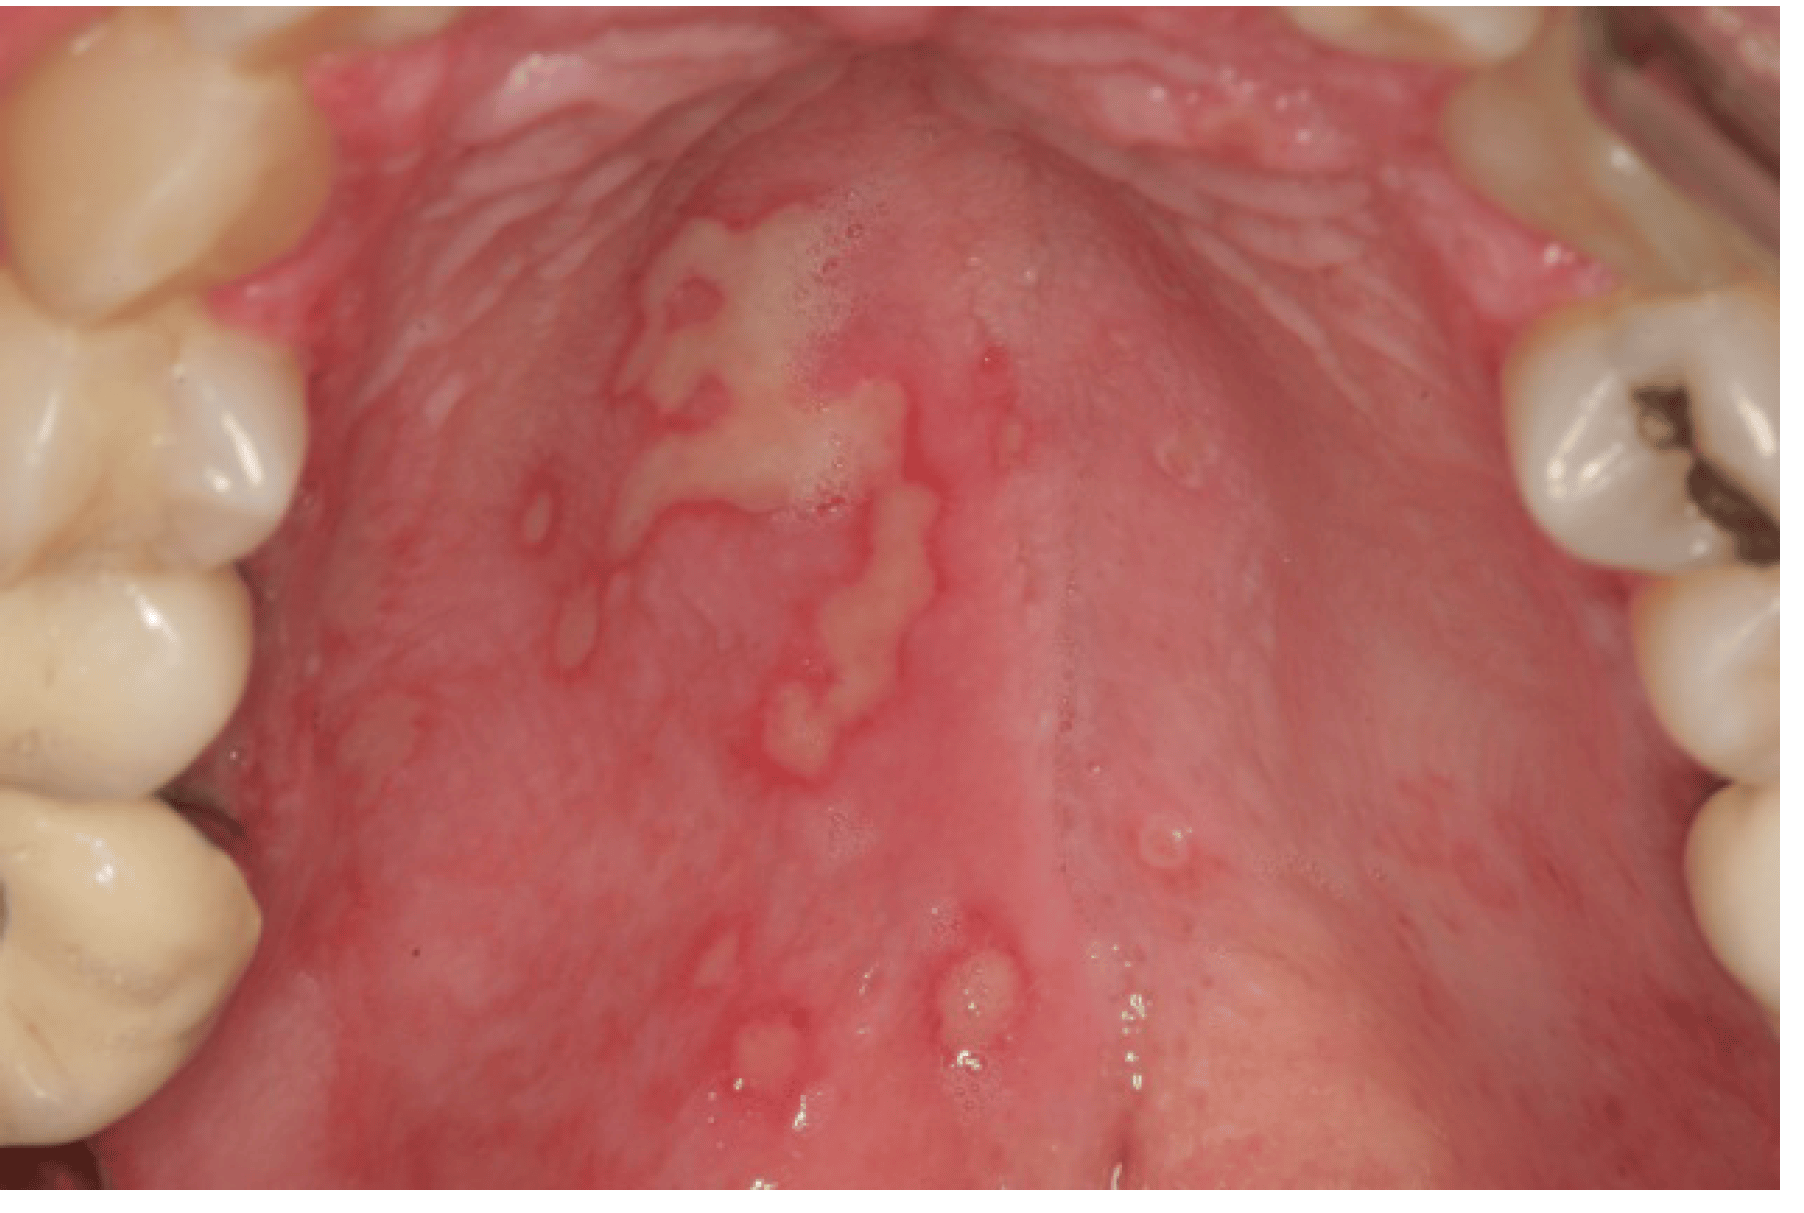 Hsv 1 On Tongue / Herpes Simplex Virus Blisters On The Tongue And Roof ...